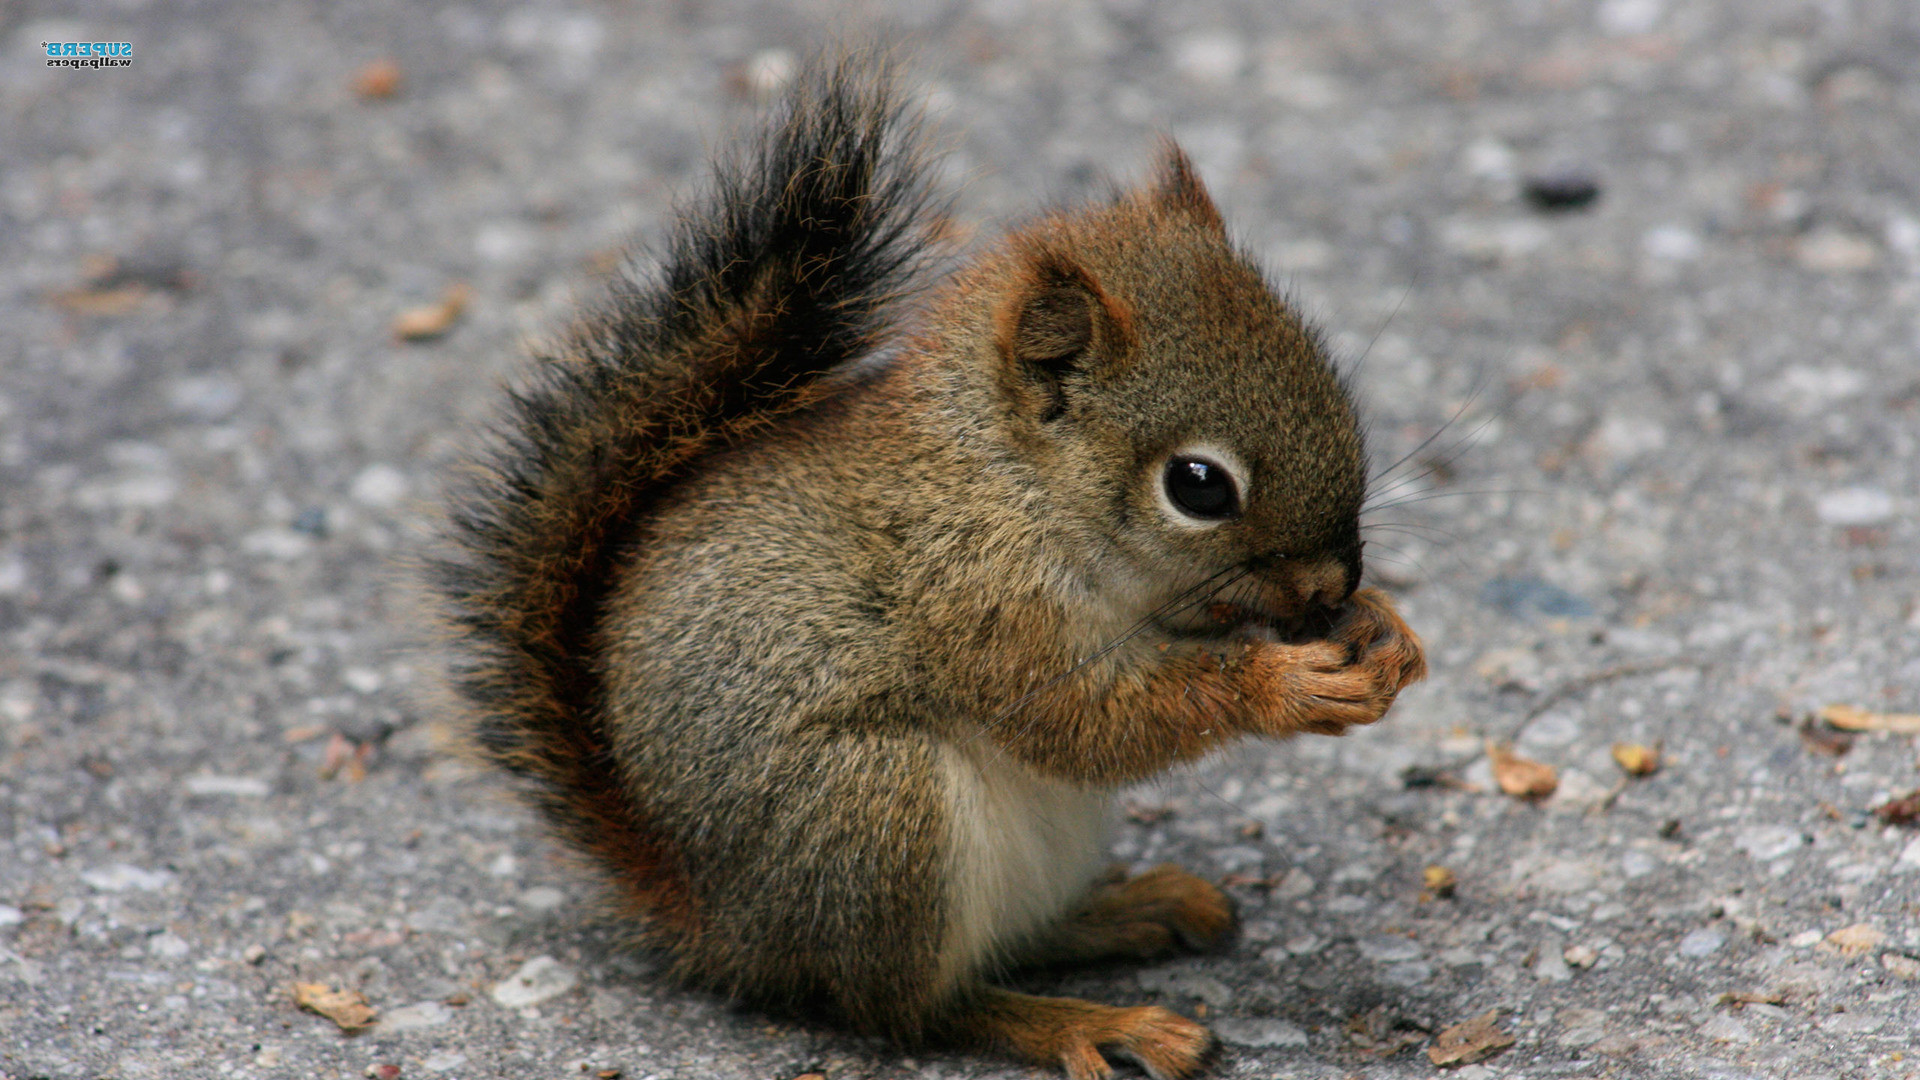 1920x1080 baby animals | Home › Animals › Cute Squirrel Baby Animal HD Wallpaper For .